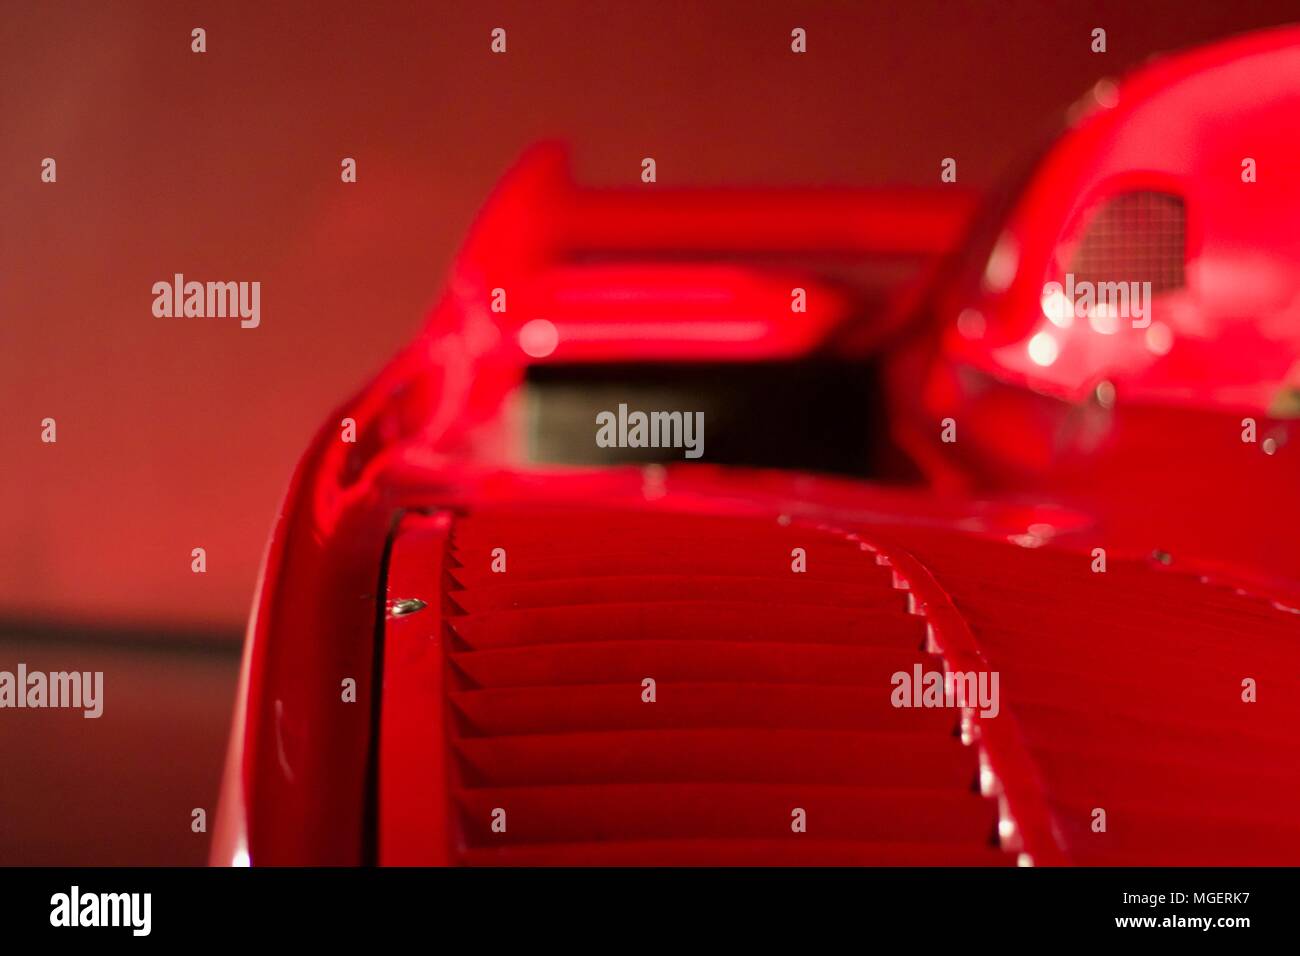 Focusing on the interior of a Ferrari red supercar on a red background Stock Photo